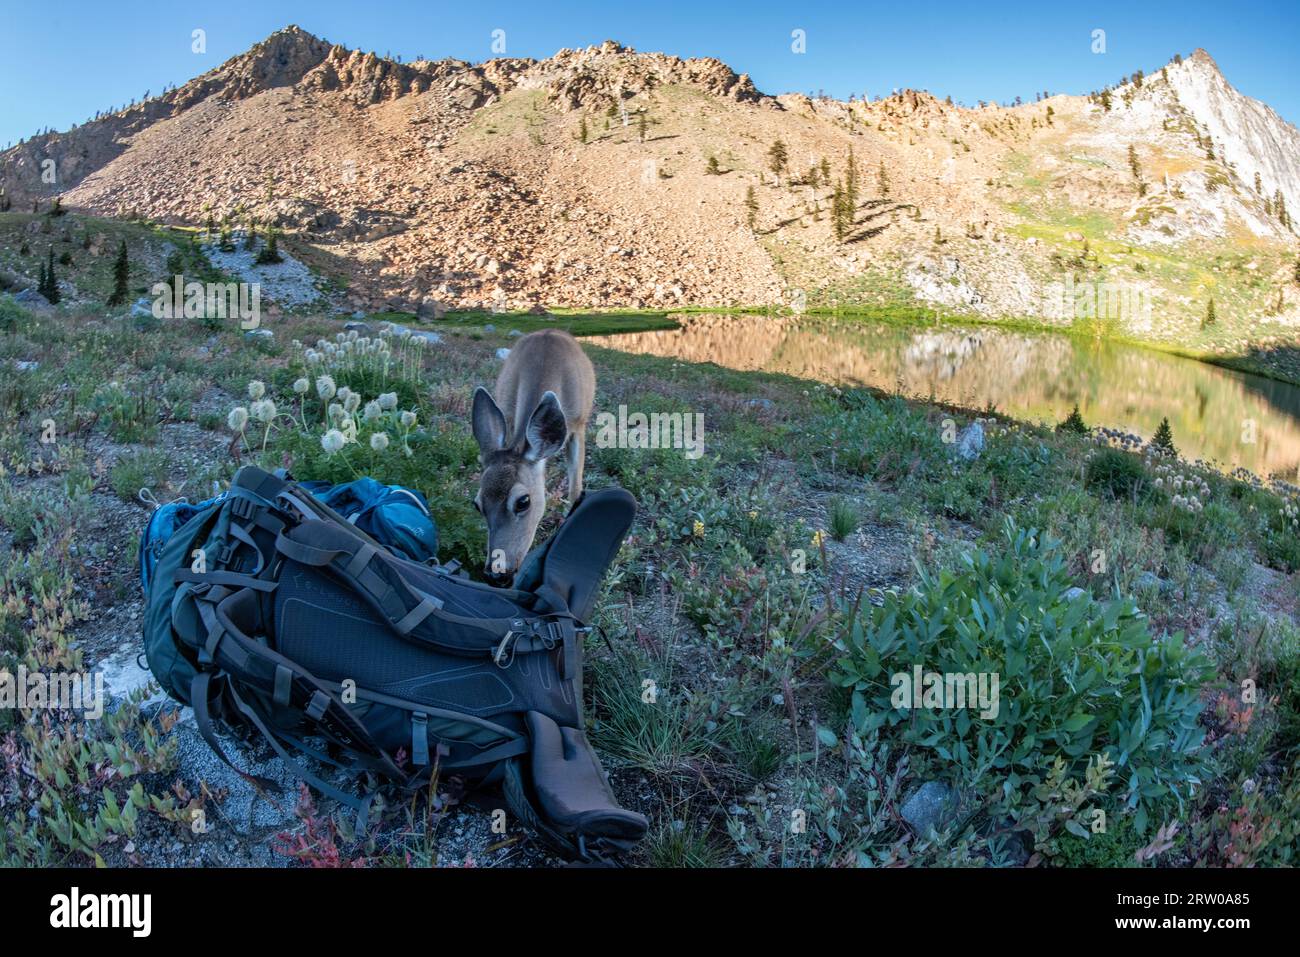 A blacktail deer chews on a backpacking pack in the picturesque landscape of the Trinity alps wilderness in Northern California. Stock Photo